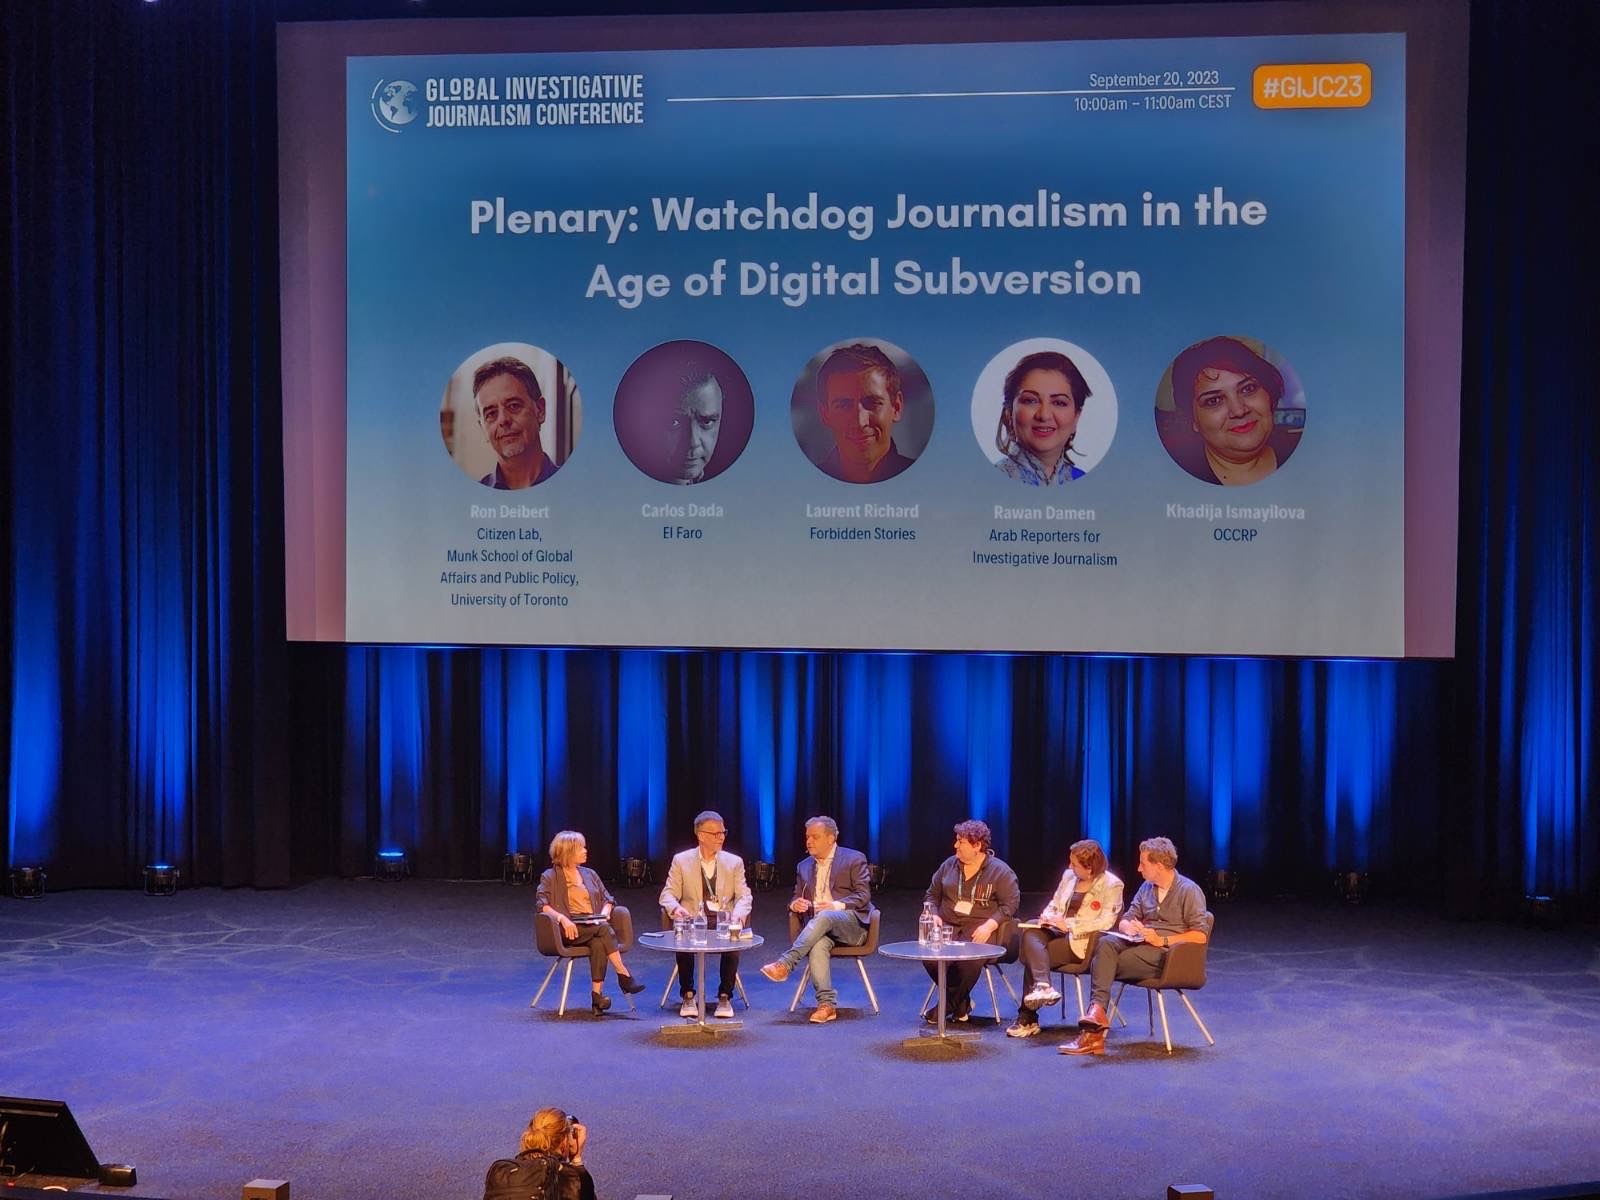 ARIJ Participates in the Global Investigative Journalism Conference in Sweden